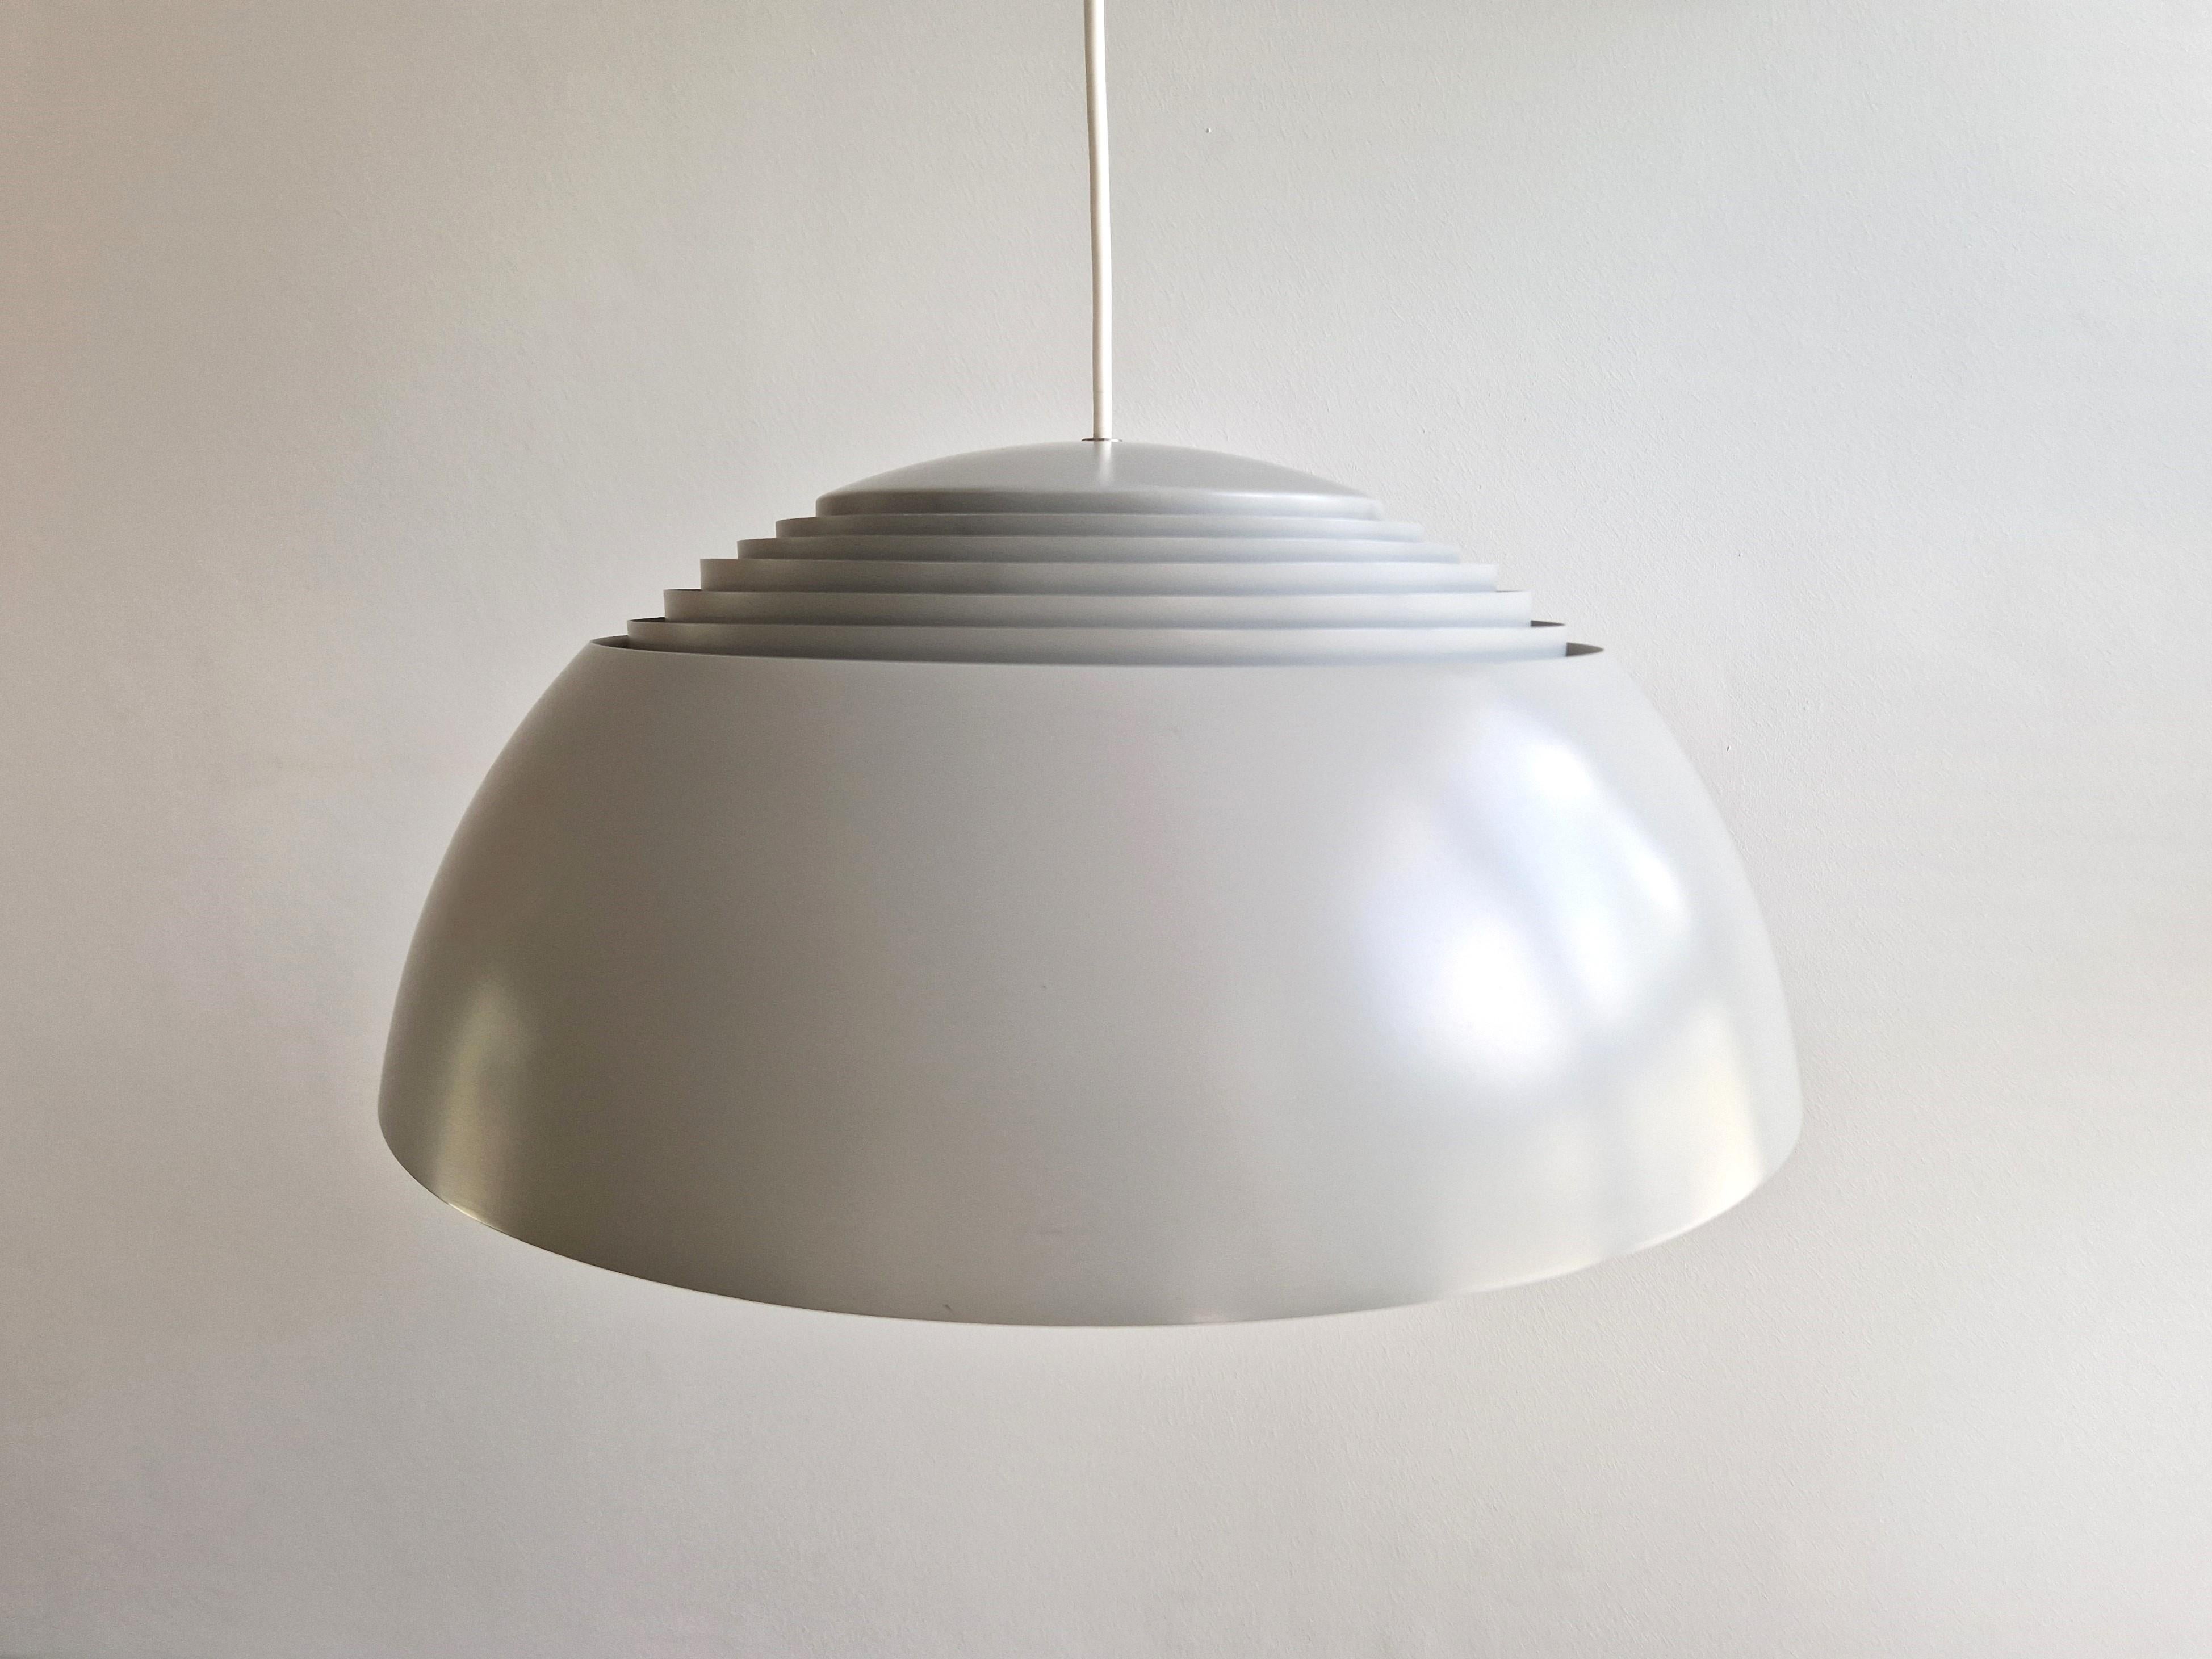 The iconic AJ Royal pendant lamp by Louis Poulsen is a design by the well-known Danish architect Arne Jacobsen from 1958 for the SAS Royal Hotel in Copenhagen. It was a hot item in the 1960's and still a perfect dining area pendant today. The AJ